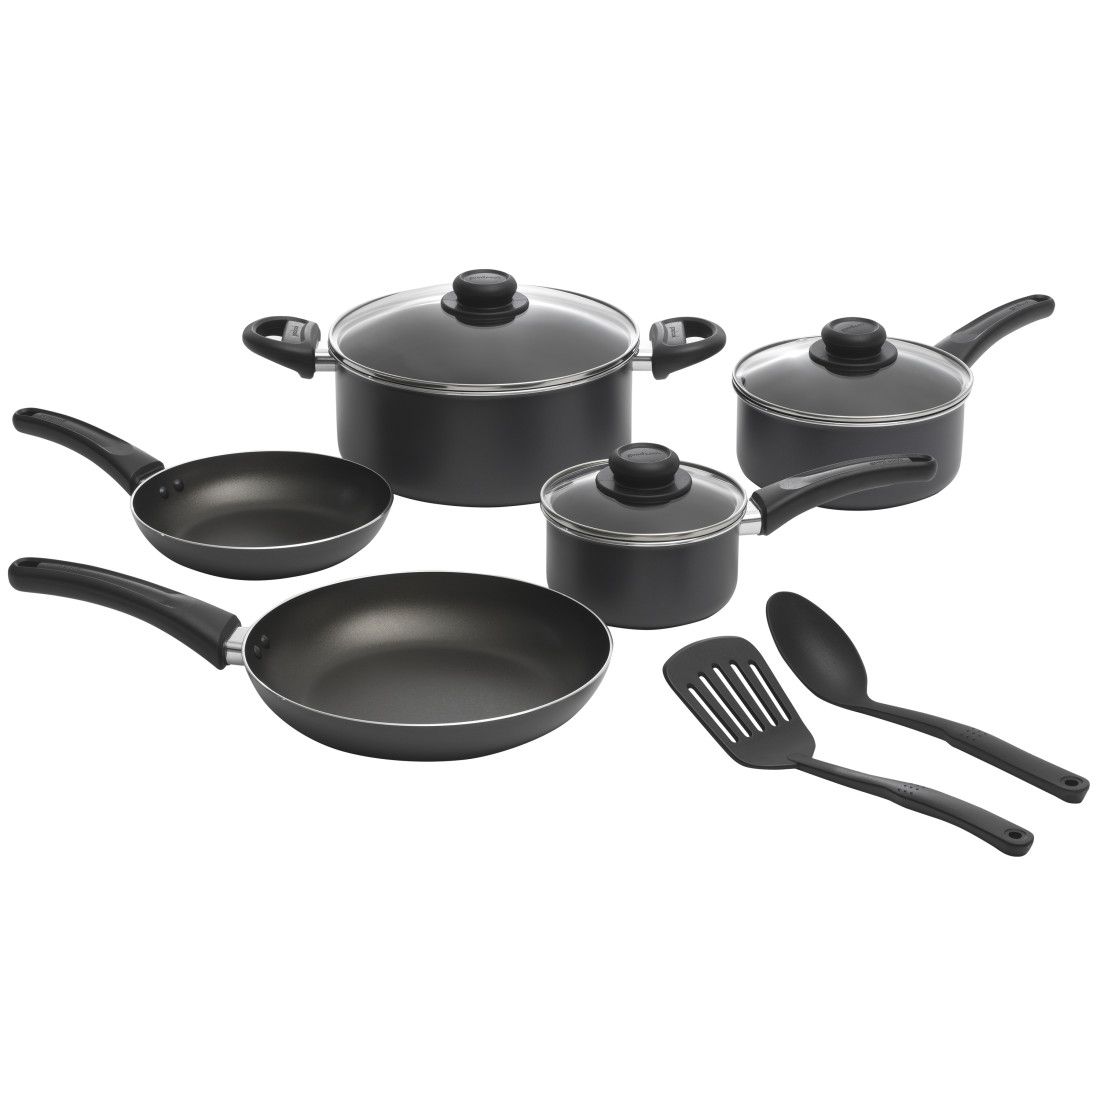 Goodful - Cozy up in the kitchen with Goodful's 10-Piece Cookware